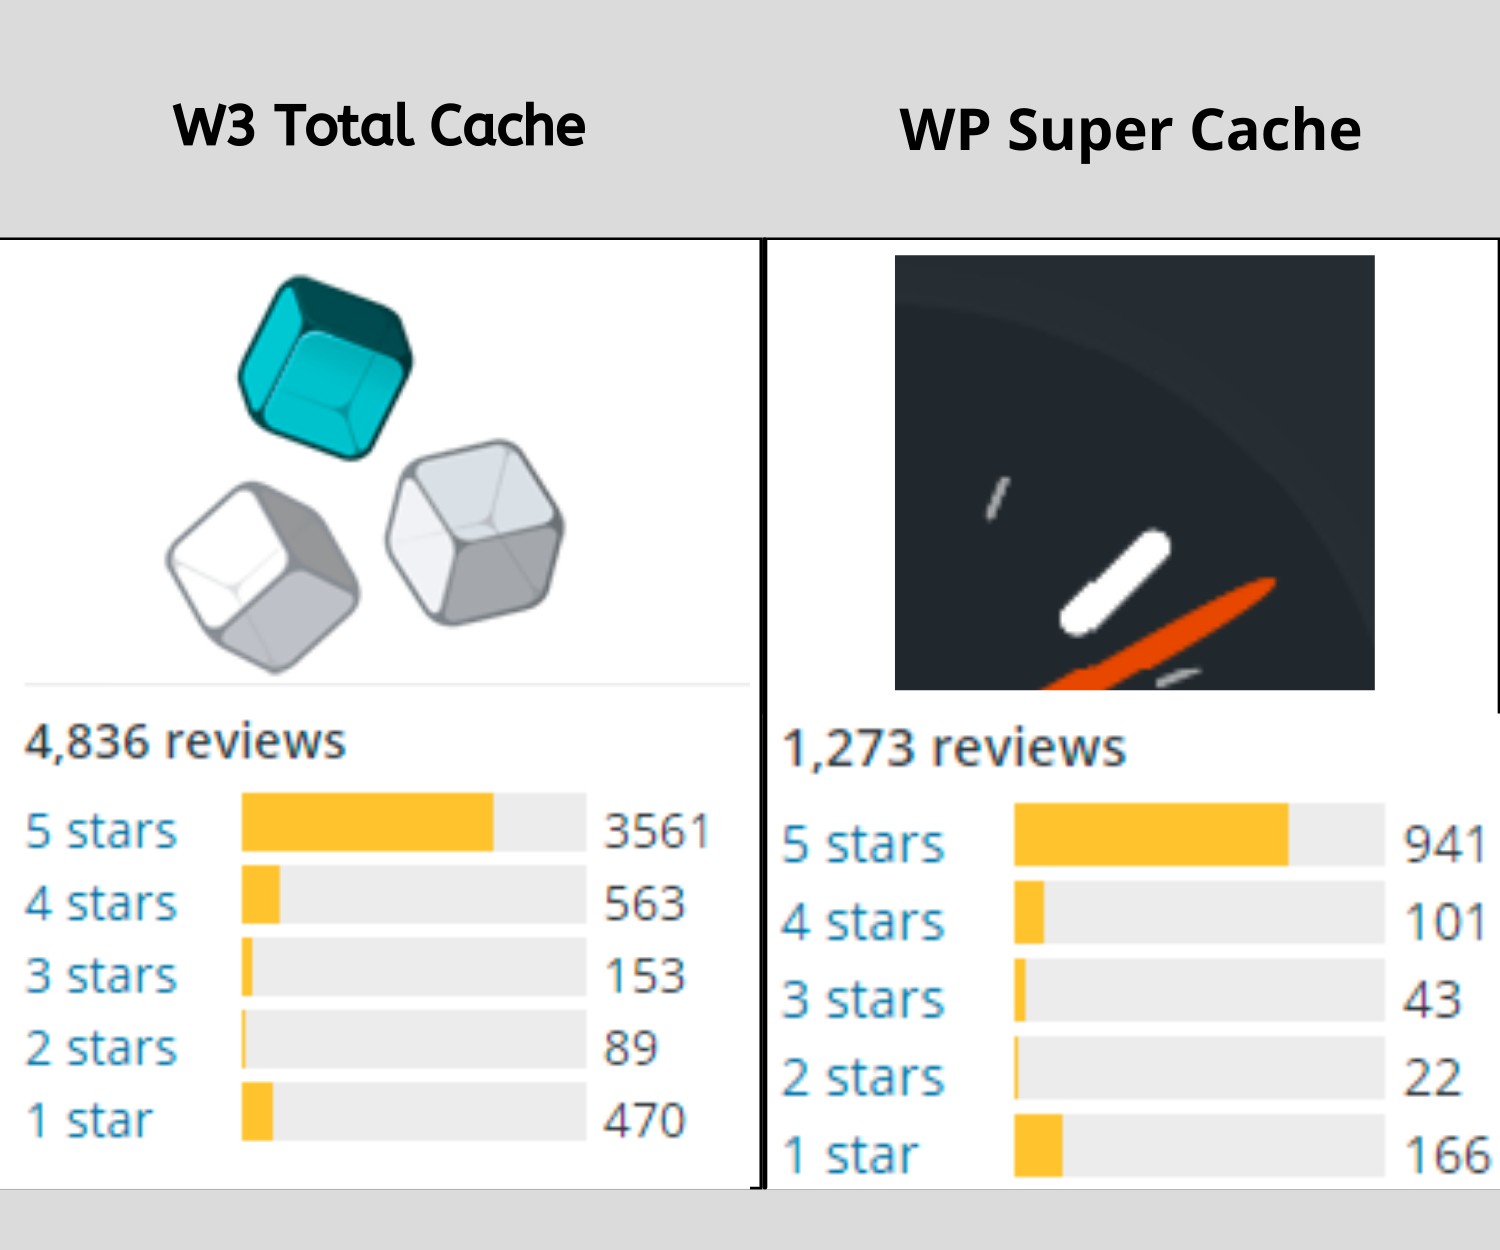 Summary of W3 Total Cache and WP Super Cache